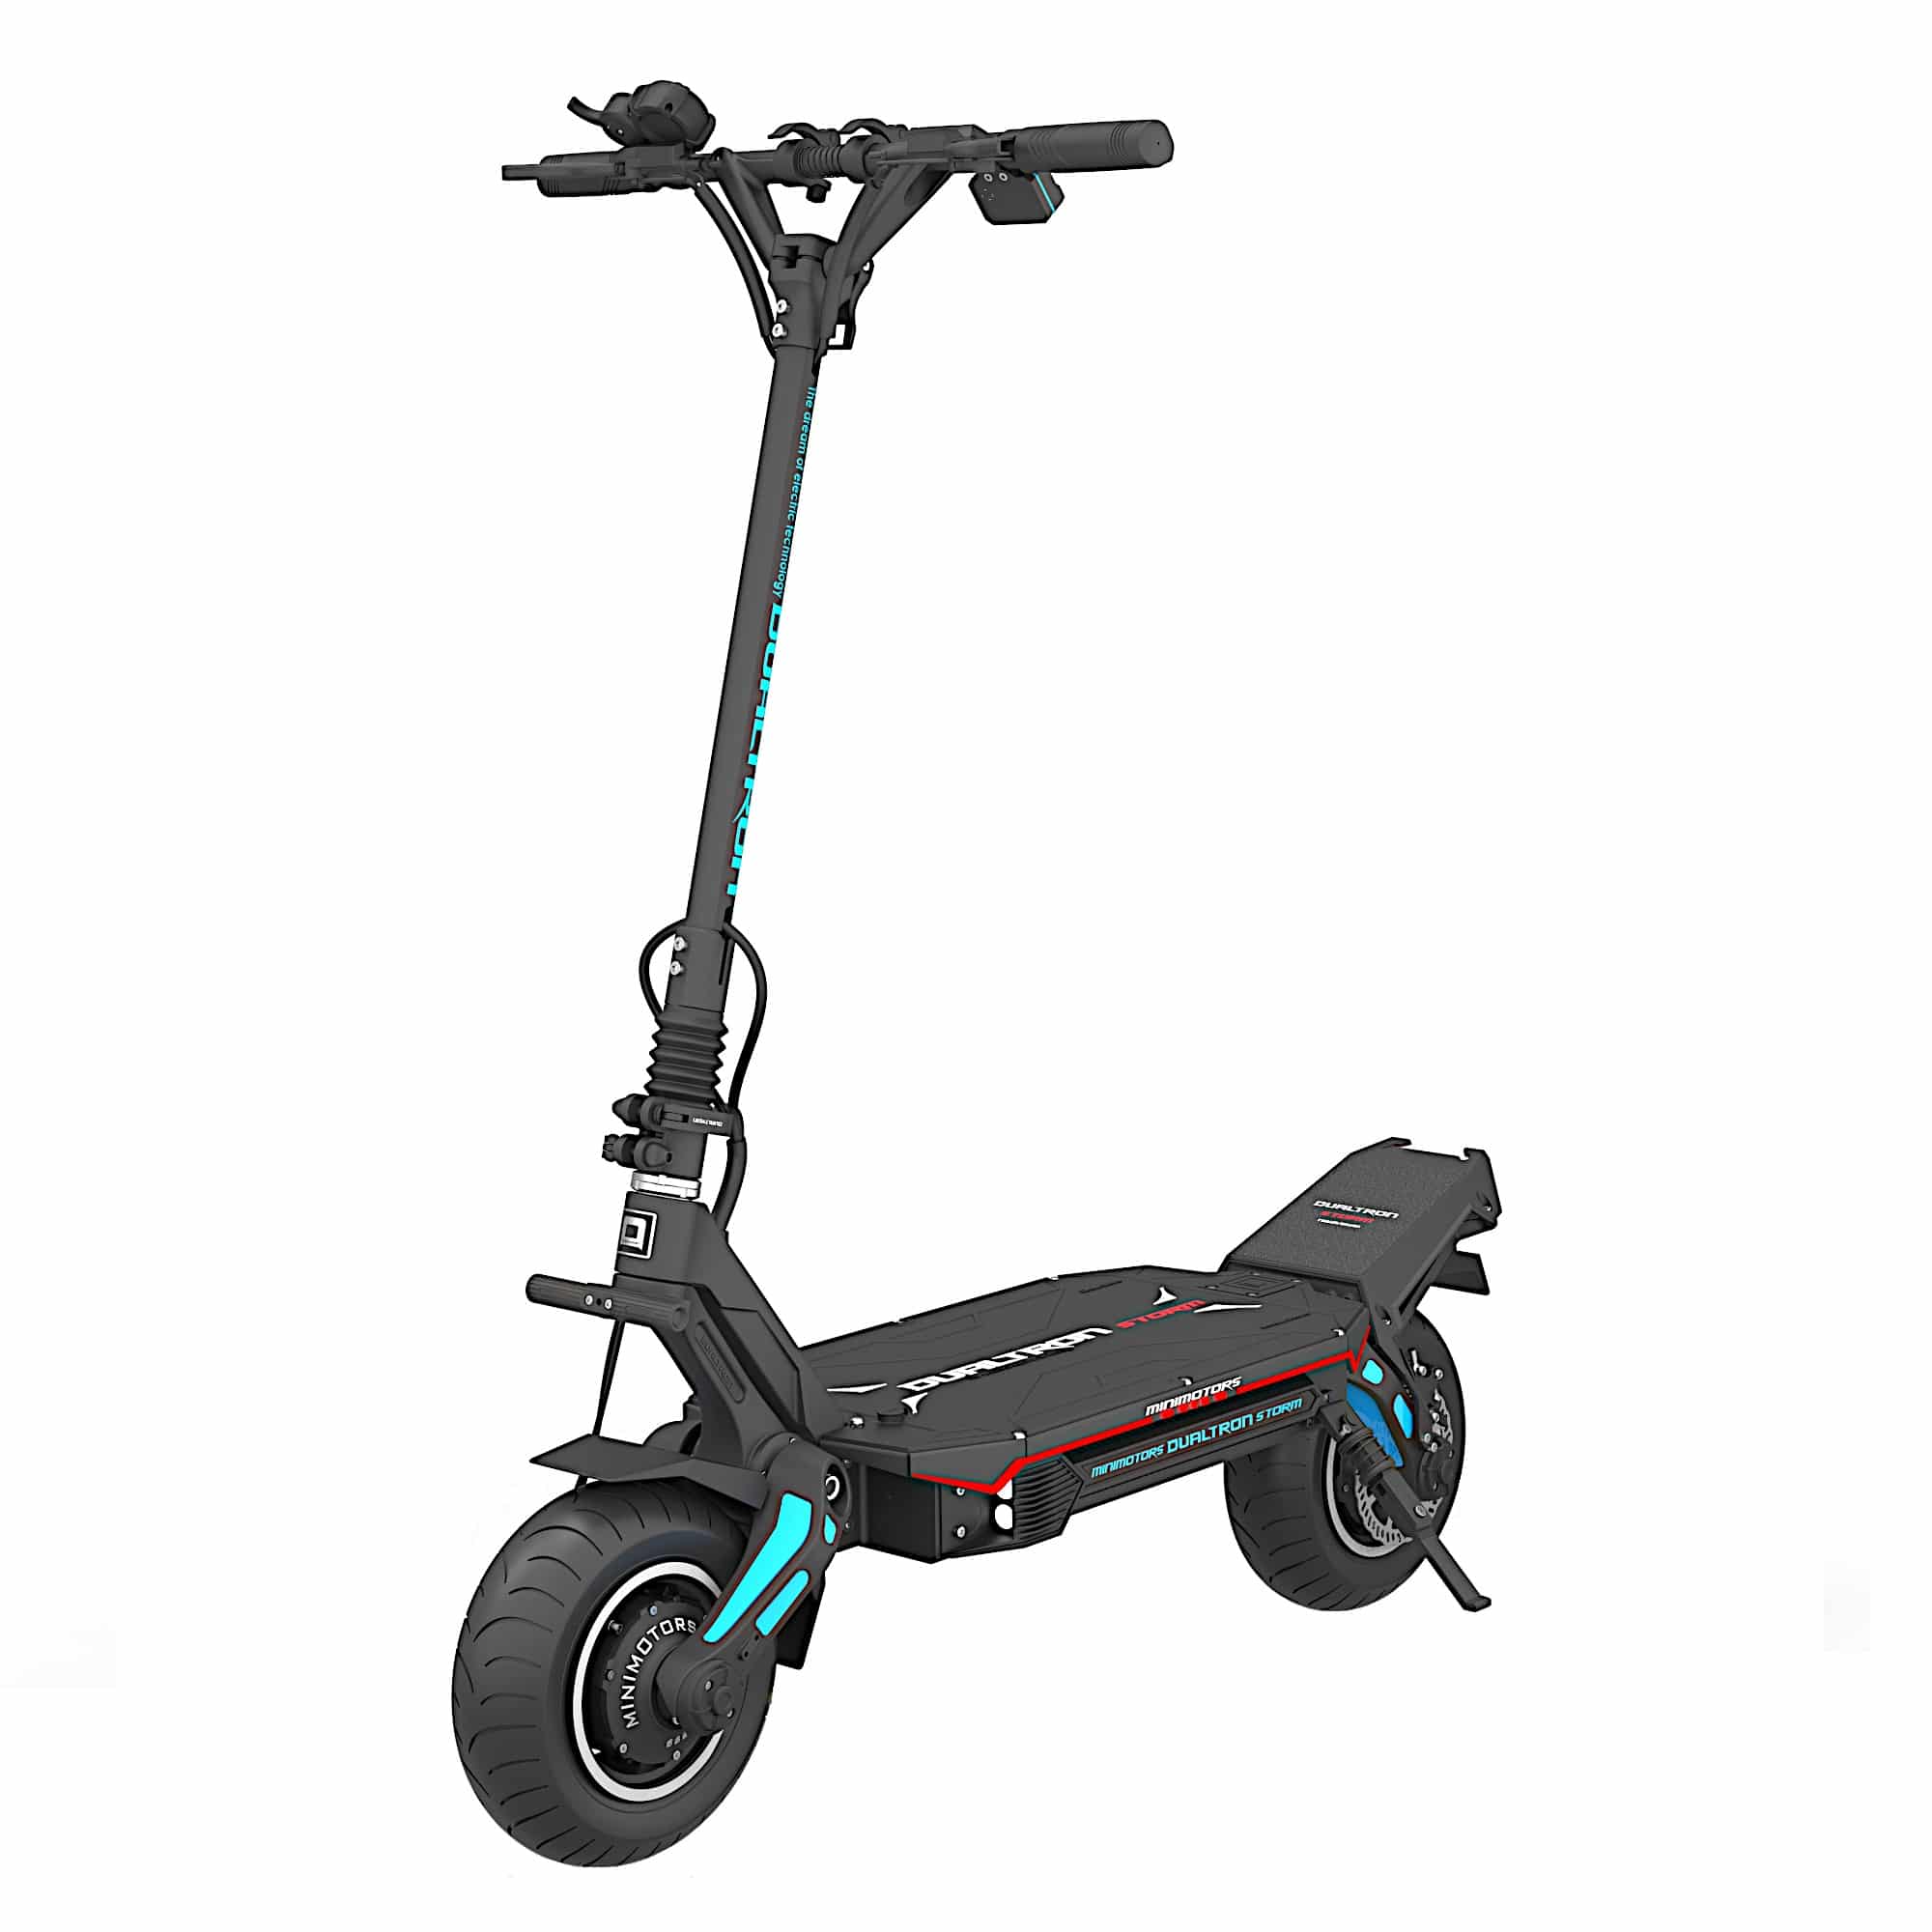 Dualtron Storm Ltd Electric Scooter 45Ah LG - LOCO Scooters